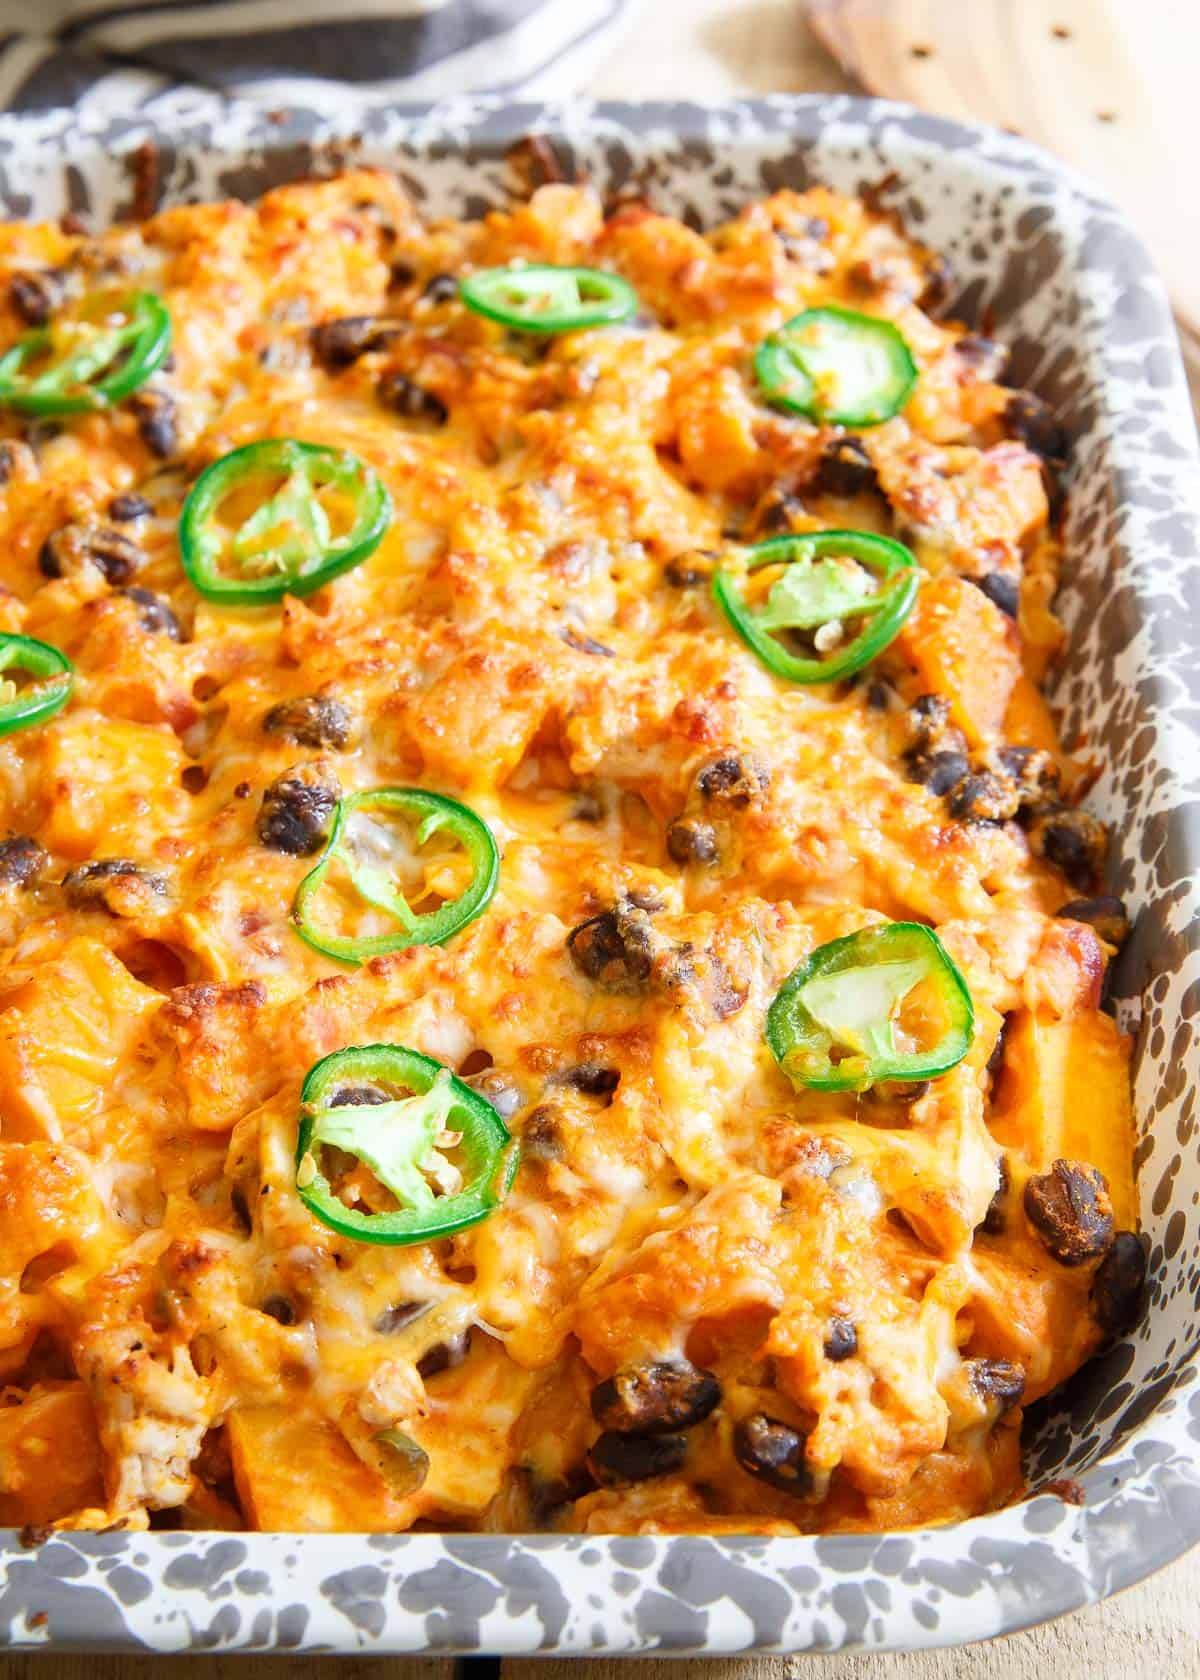 Savory pumpkin casserole topped with jalepeno slices